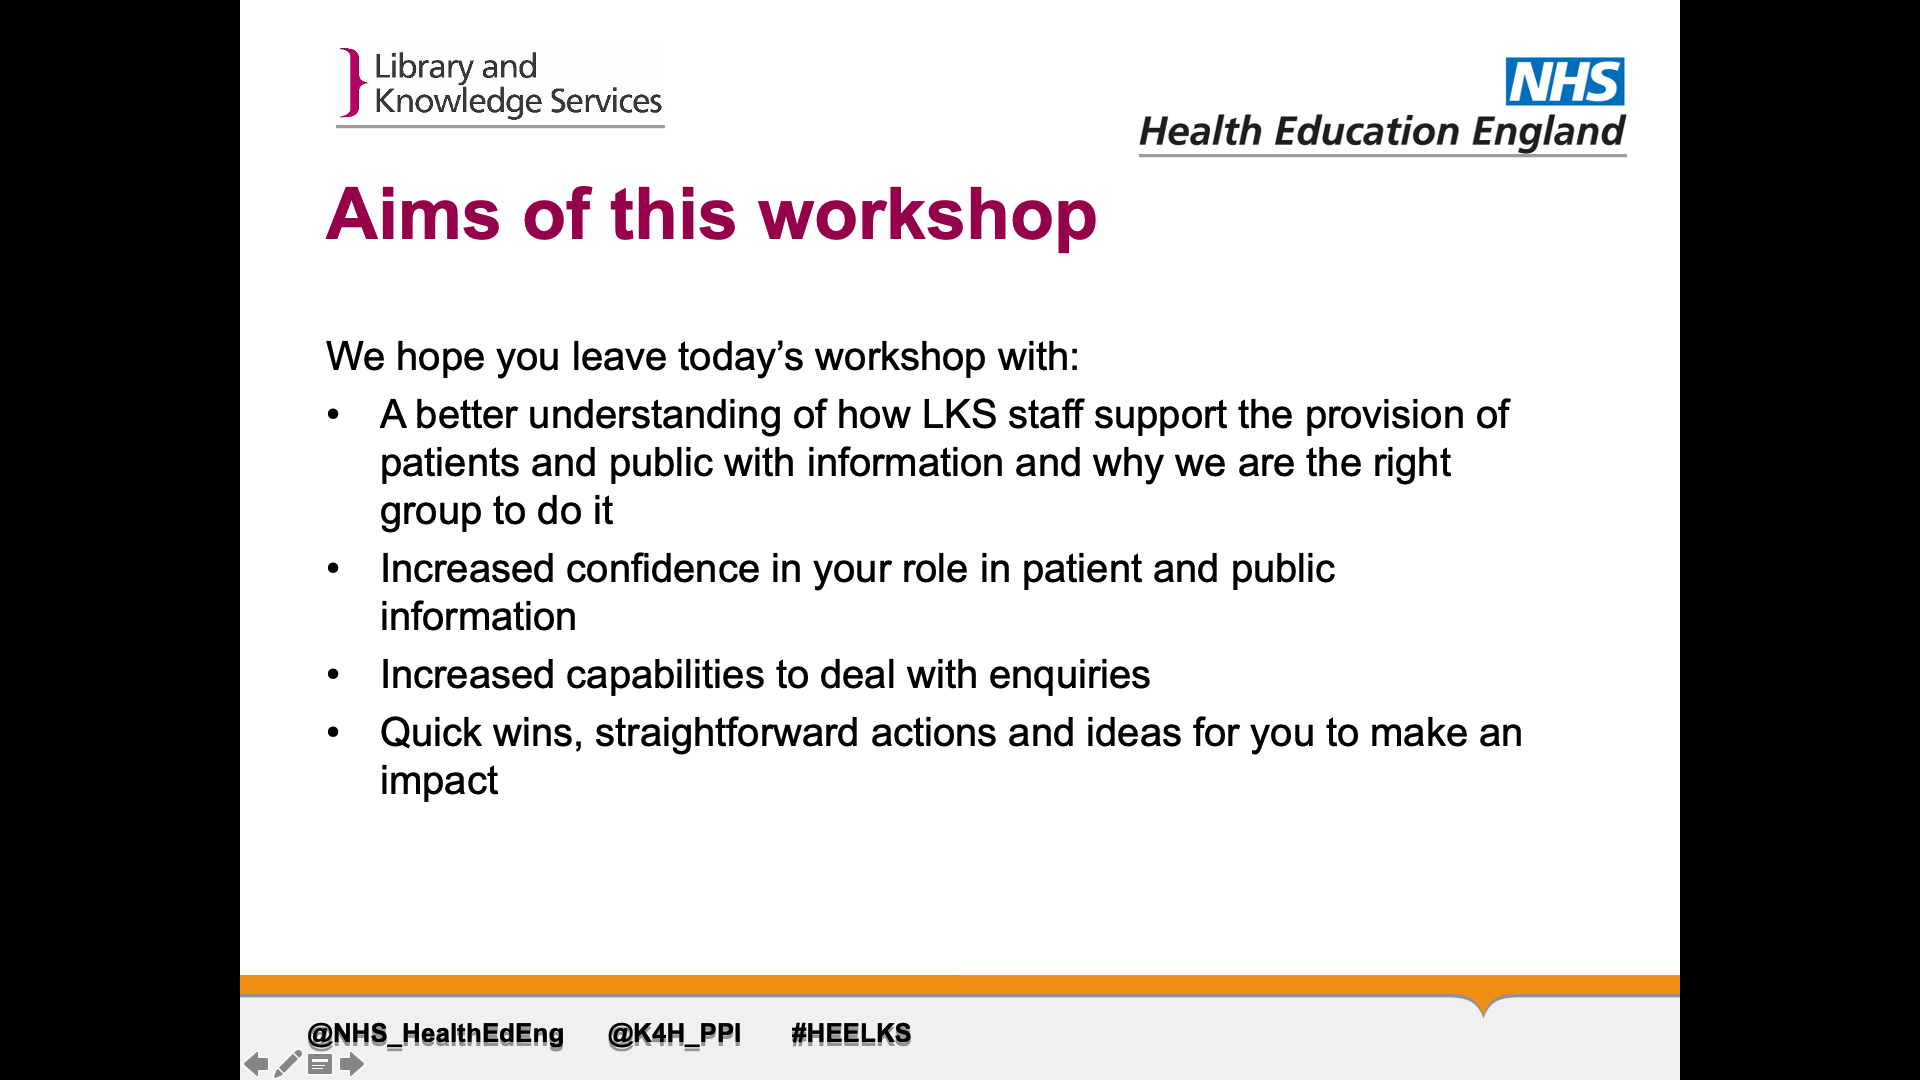 Title: Aims of this workshop. Text on page in list format: We hope you leave today’s workshop with: 1. A better understanding of how LKS staff support the provision of patients and public with information and why we are the right group to do it 2. Increased confidence in your role in patient and public information 3. Increased capabilities to deal with enquiries  4.Quick wins, straightforward actions and ideas for you to make an impact